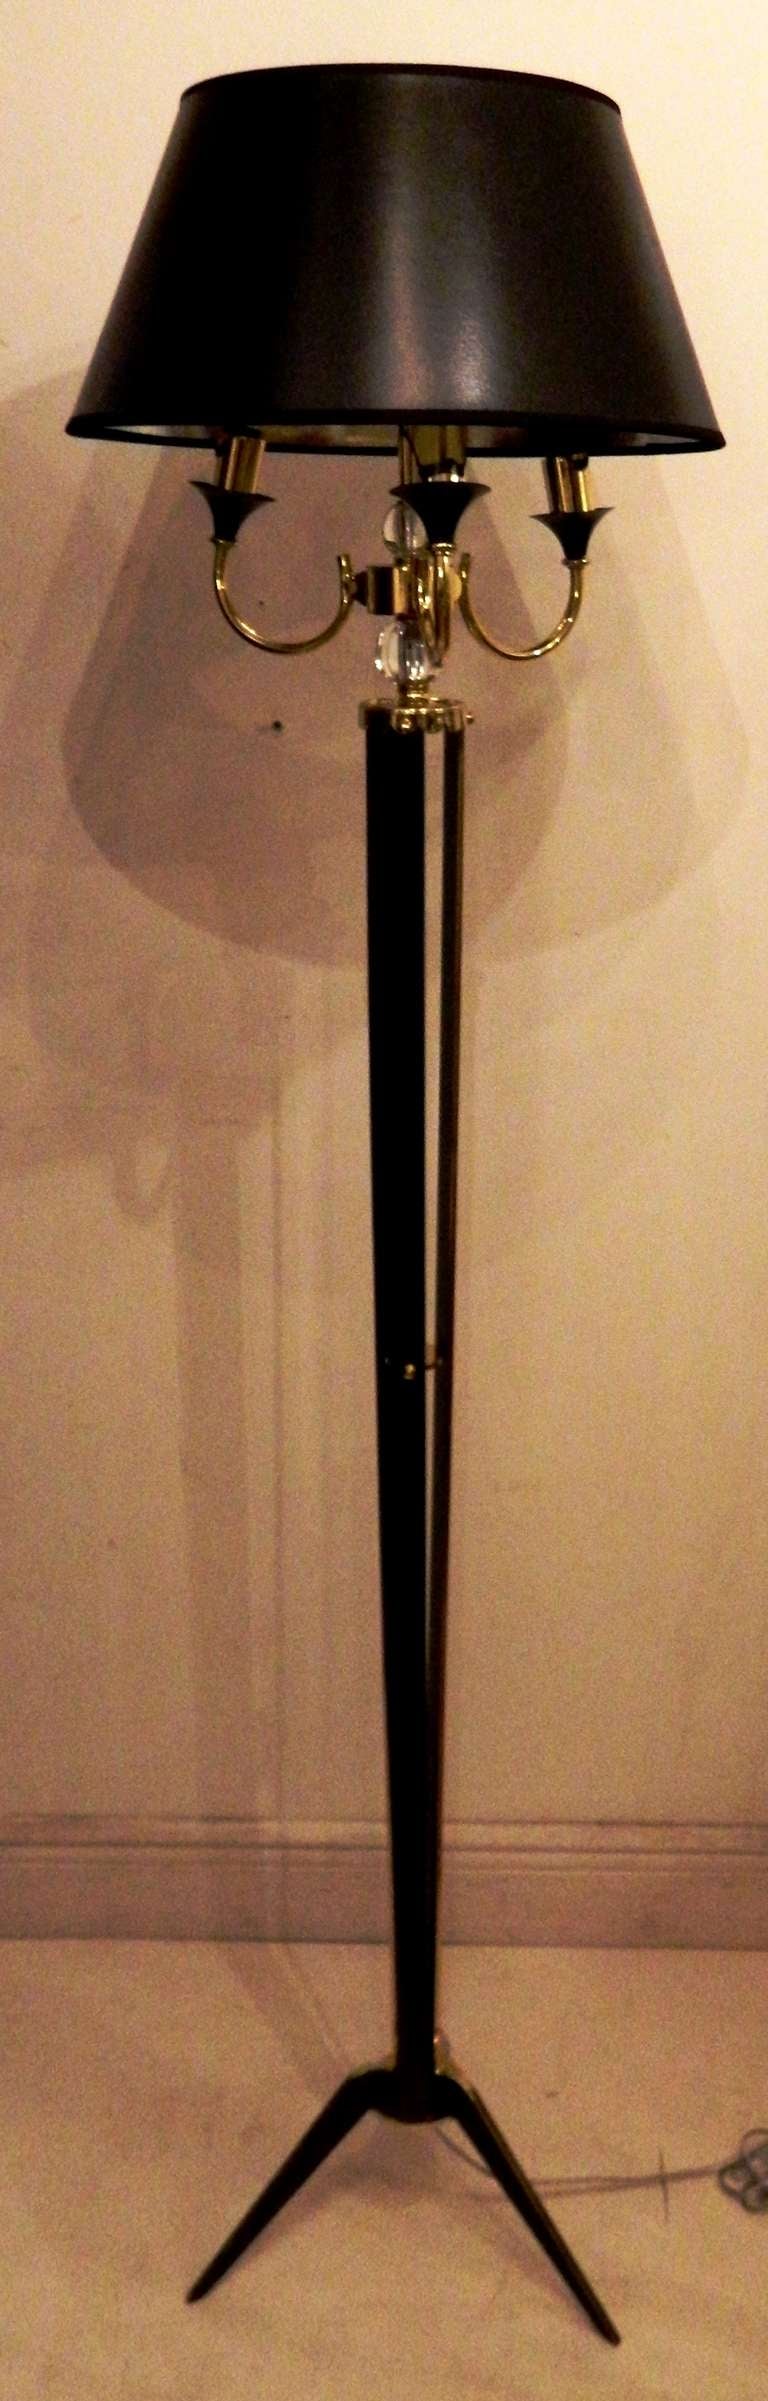 Pair of Maison Jansen floor lamp with three lights, two patinas gun metal and brass.
Three bulbs 100w each.
US wired and in working condition.
Shade: 17